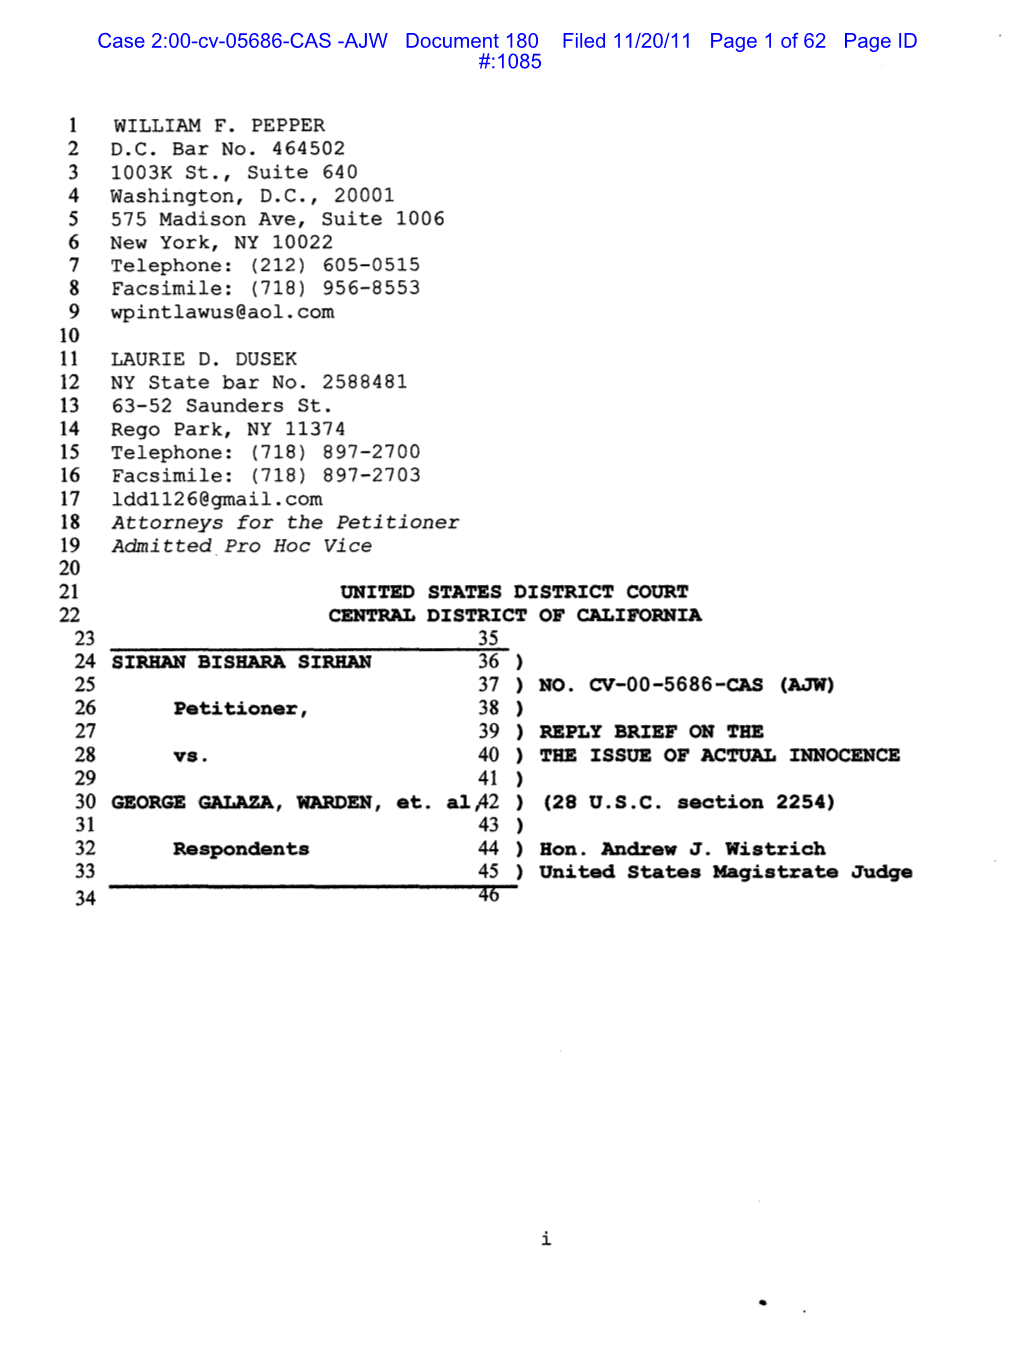 Case 2:00-Cv-05686-CAS -AJW Document 180 Filed 11/20/11 Page 1 of 62 Page ID #:1085